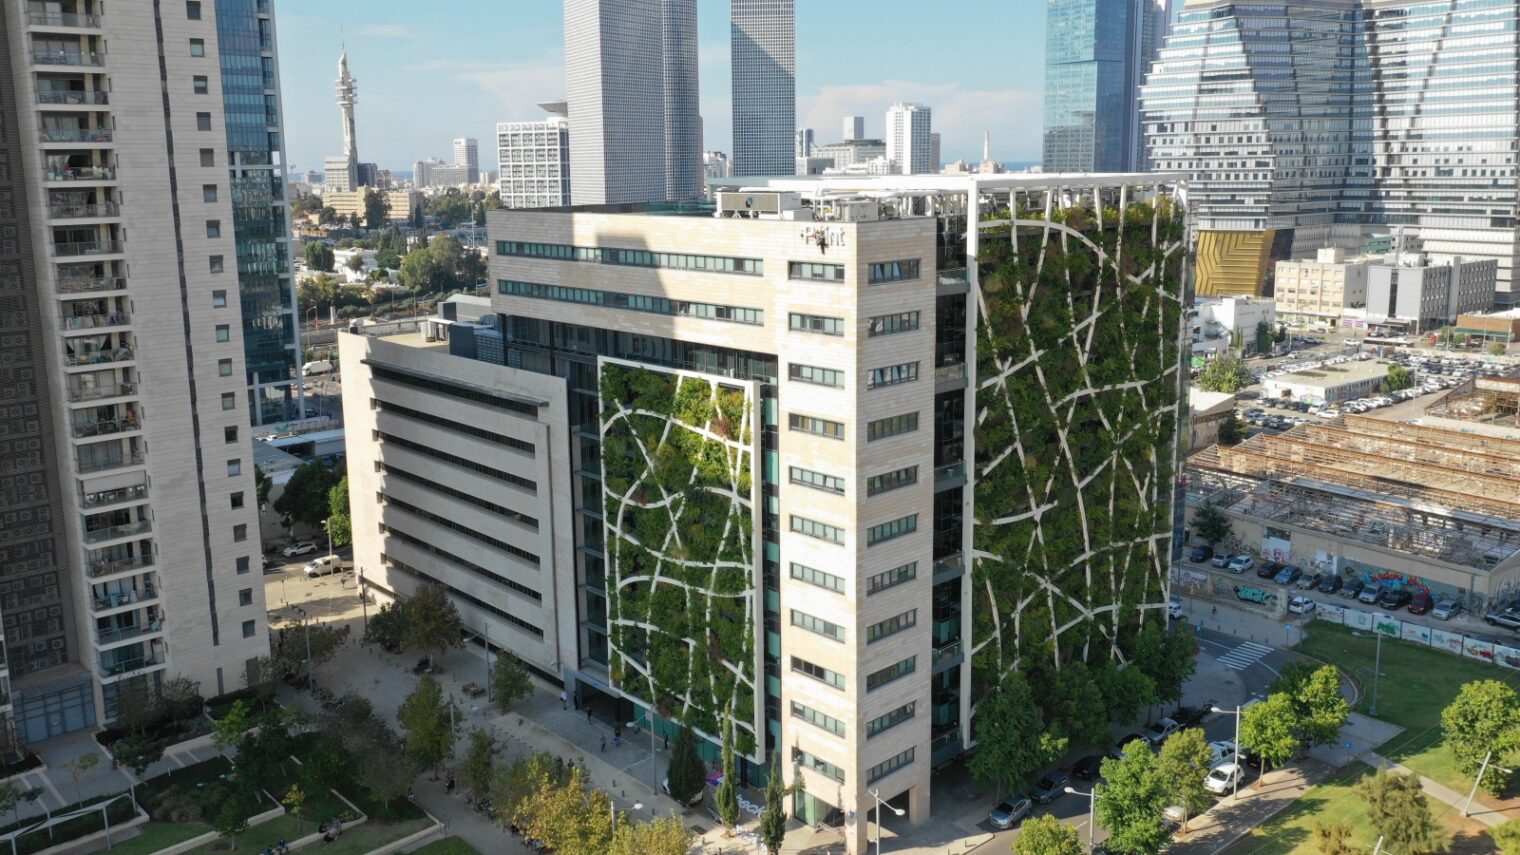 The Check Point building covered in 'green walls' is one of the Israeli projects on display at the Tel Aviv Museum of Art's climate change exhibit. Photo courtesy of Check Point